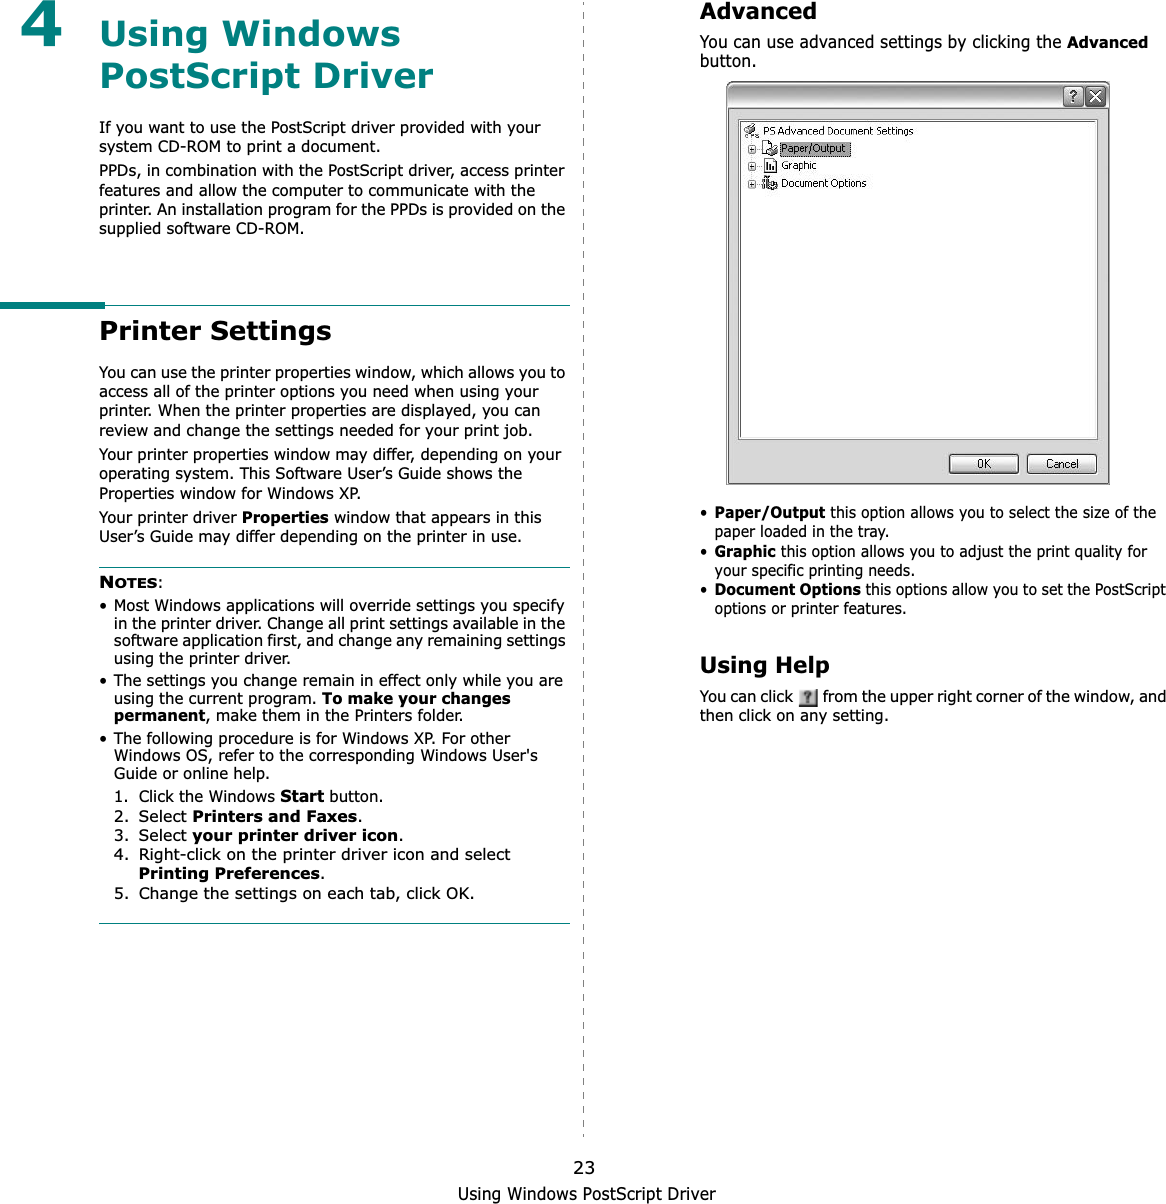 Using Windows PostScript Driver234Using Windows PostScript DriverIf you want to use the PostScript driver provided with your system CD-ROM to print a document.PPDs, in combination with the PostScript driver, access printer features and allow the computer to communicate with the printer. An installation program for the PPDs is provided on the supplied software CD-ROM. Printer SettingsYou can use the printer properties window, which allows you to access all of the printer options you need when using your printer. When the printer properties are displayed, you can review and change the settings needed for your print job. Your printer properties window may differ, depending on your operating system. This Software User’s Guide shows the Properties window for Windows XP.Your printer driver Properties window that appears in this User’s Guide may differ depending on the printer in use.NOTES:• Most Windows applications will override settings you specify in the printer driver. Change all print settings available in the software application first, and change any remaining settings using the printer driver. • The settings you change remain in effect only while you are using the current program. To make your changes permanent, make them in the Printers folder. • The following procedure is for Windows XP. For other Windows OS, refer to the corresponding Windows User&apos;s Guide or online help.1. Click the Windows Start button.2. Select Printers and Faxes.3. Select your printer driver icon.4. Right-click on the printer driver icon and select Printing Preferences.5. Change the settings on each tab, click OK.AdvancedYou can use advanced settings by clicking the Advancedbutton.•Paper/Output this option allows you to select the size of the paper loaded in the tray.•Graphicthis option allows you to adjust the print quality for your specific printing needs.•Document Optionsthis options allow you to set the PostScript options or printer features.Using HelpYou can click   from the upper right corner of the window, and then click on any setting. 